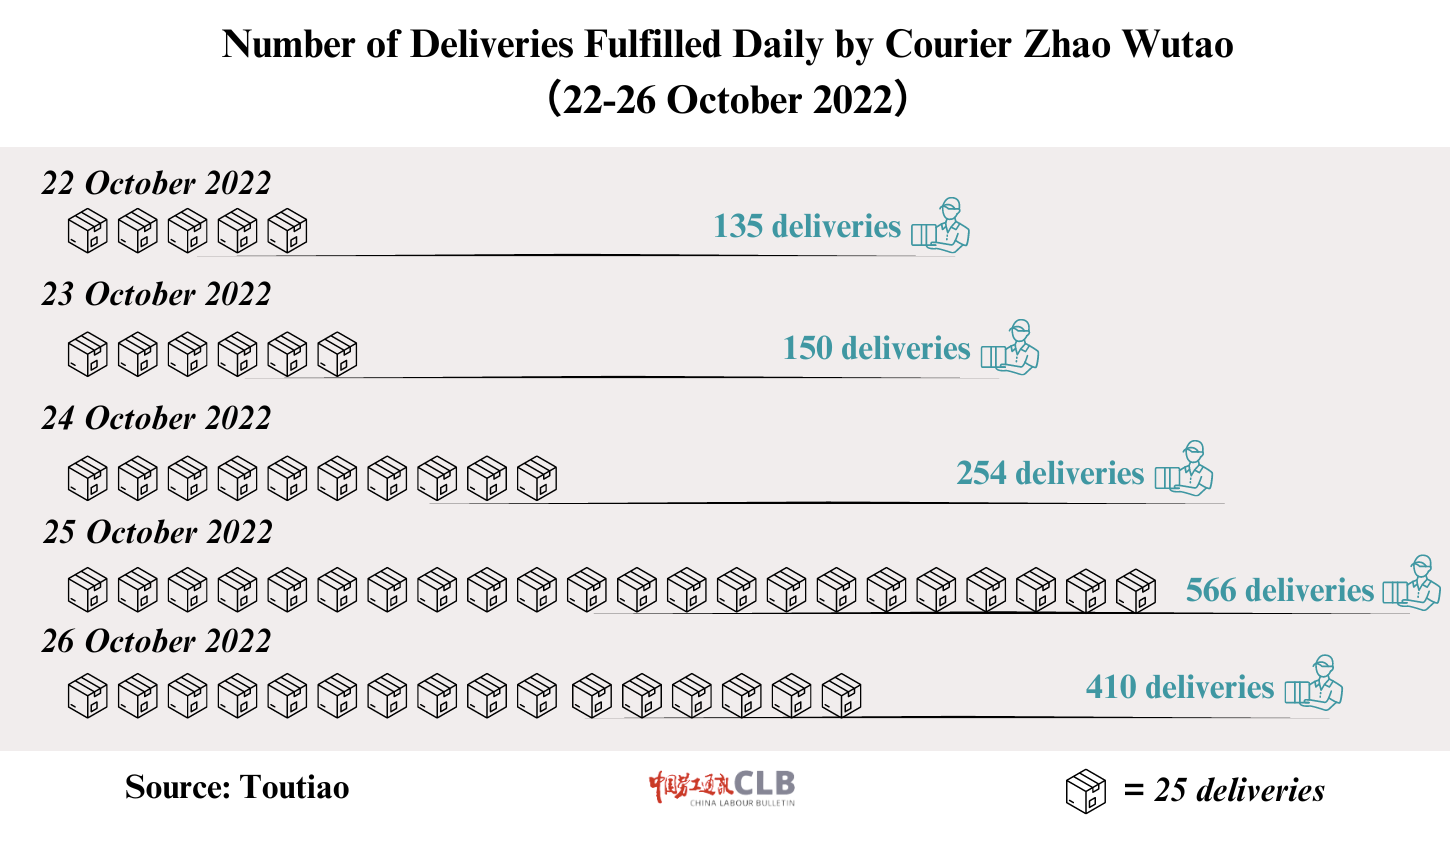 A CLB graphic shows the number of deliveries Zhao Wutao fulfilled in the days before his death had tripled